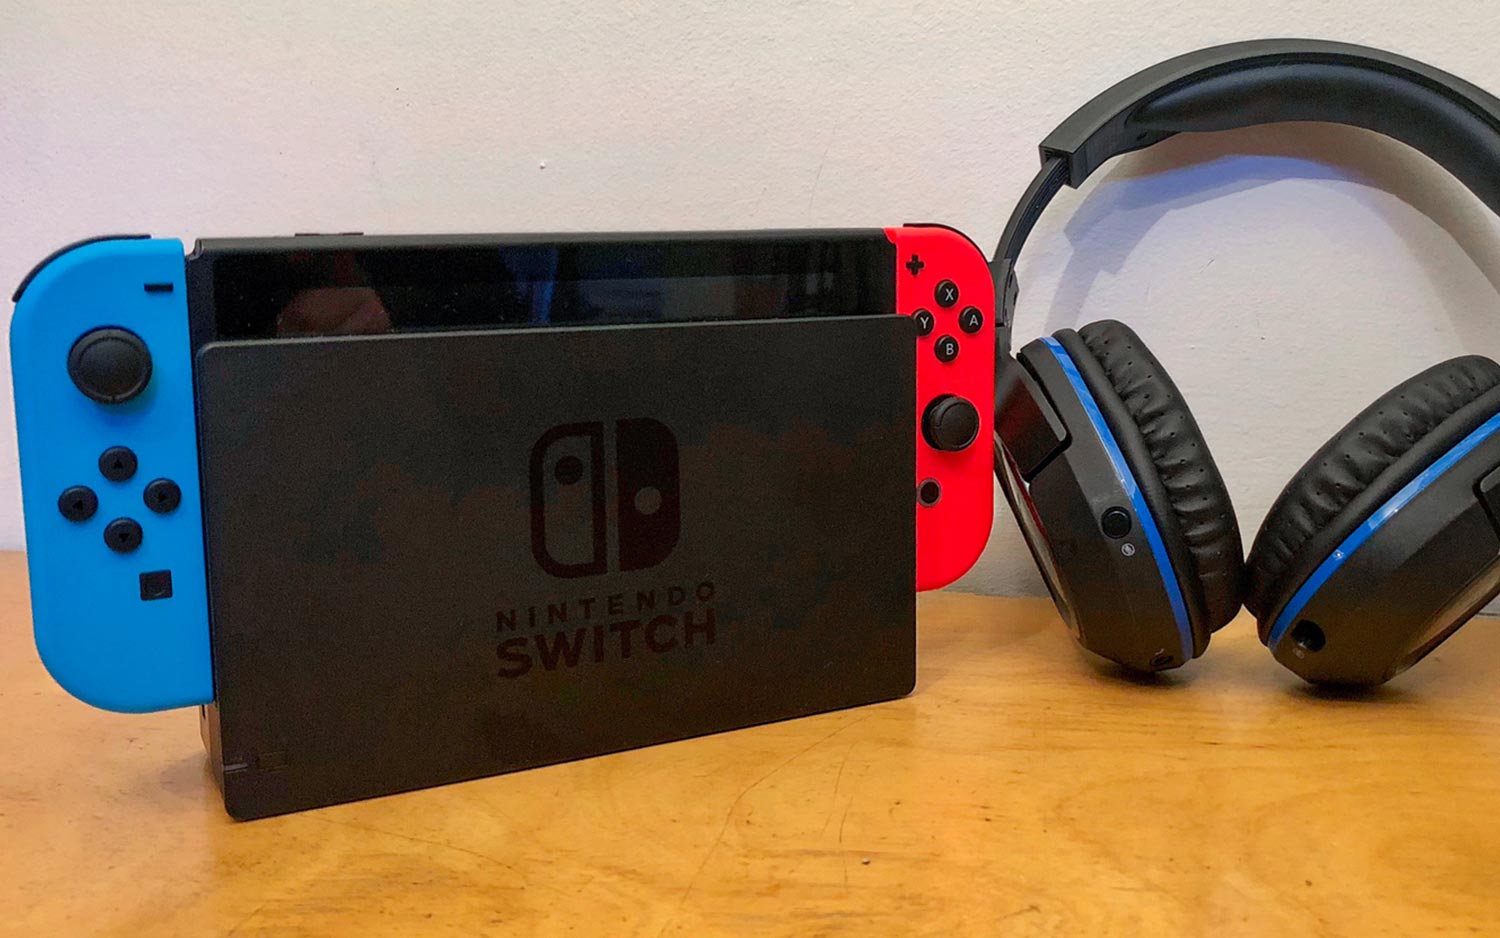 How To Connect Bluetooth Headphones To A Nintendo Switch Via The USB-C?